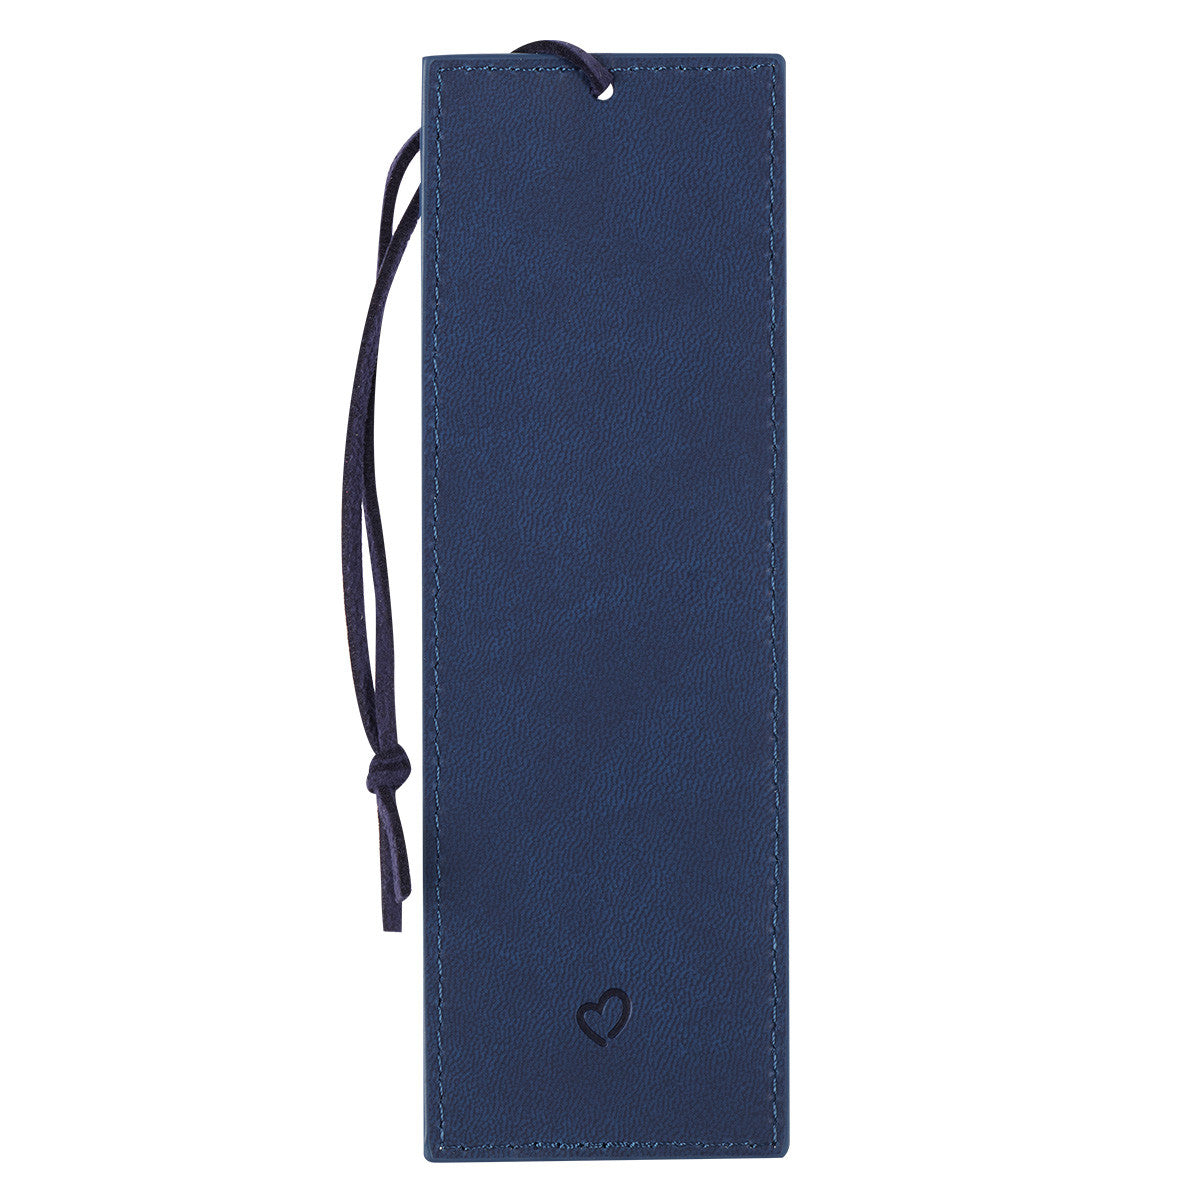 You Got This Blue Faux Leather Bookmark - The Christian Gift Company